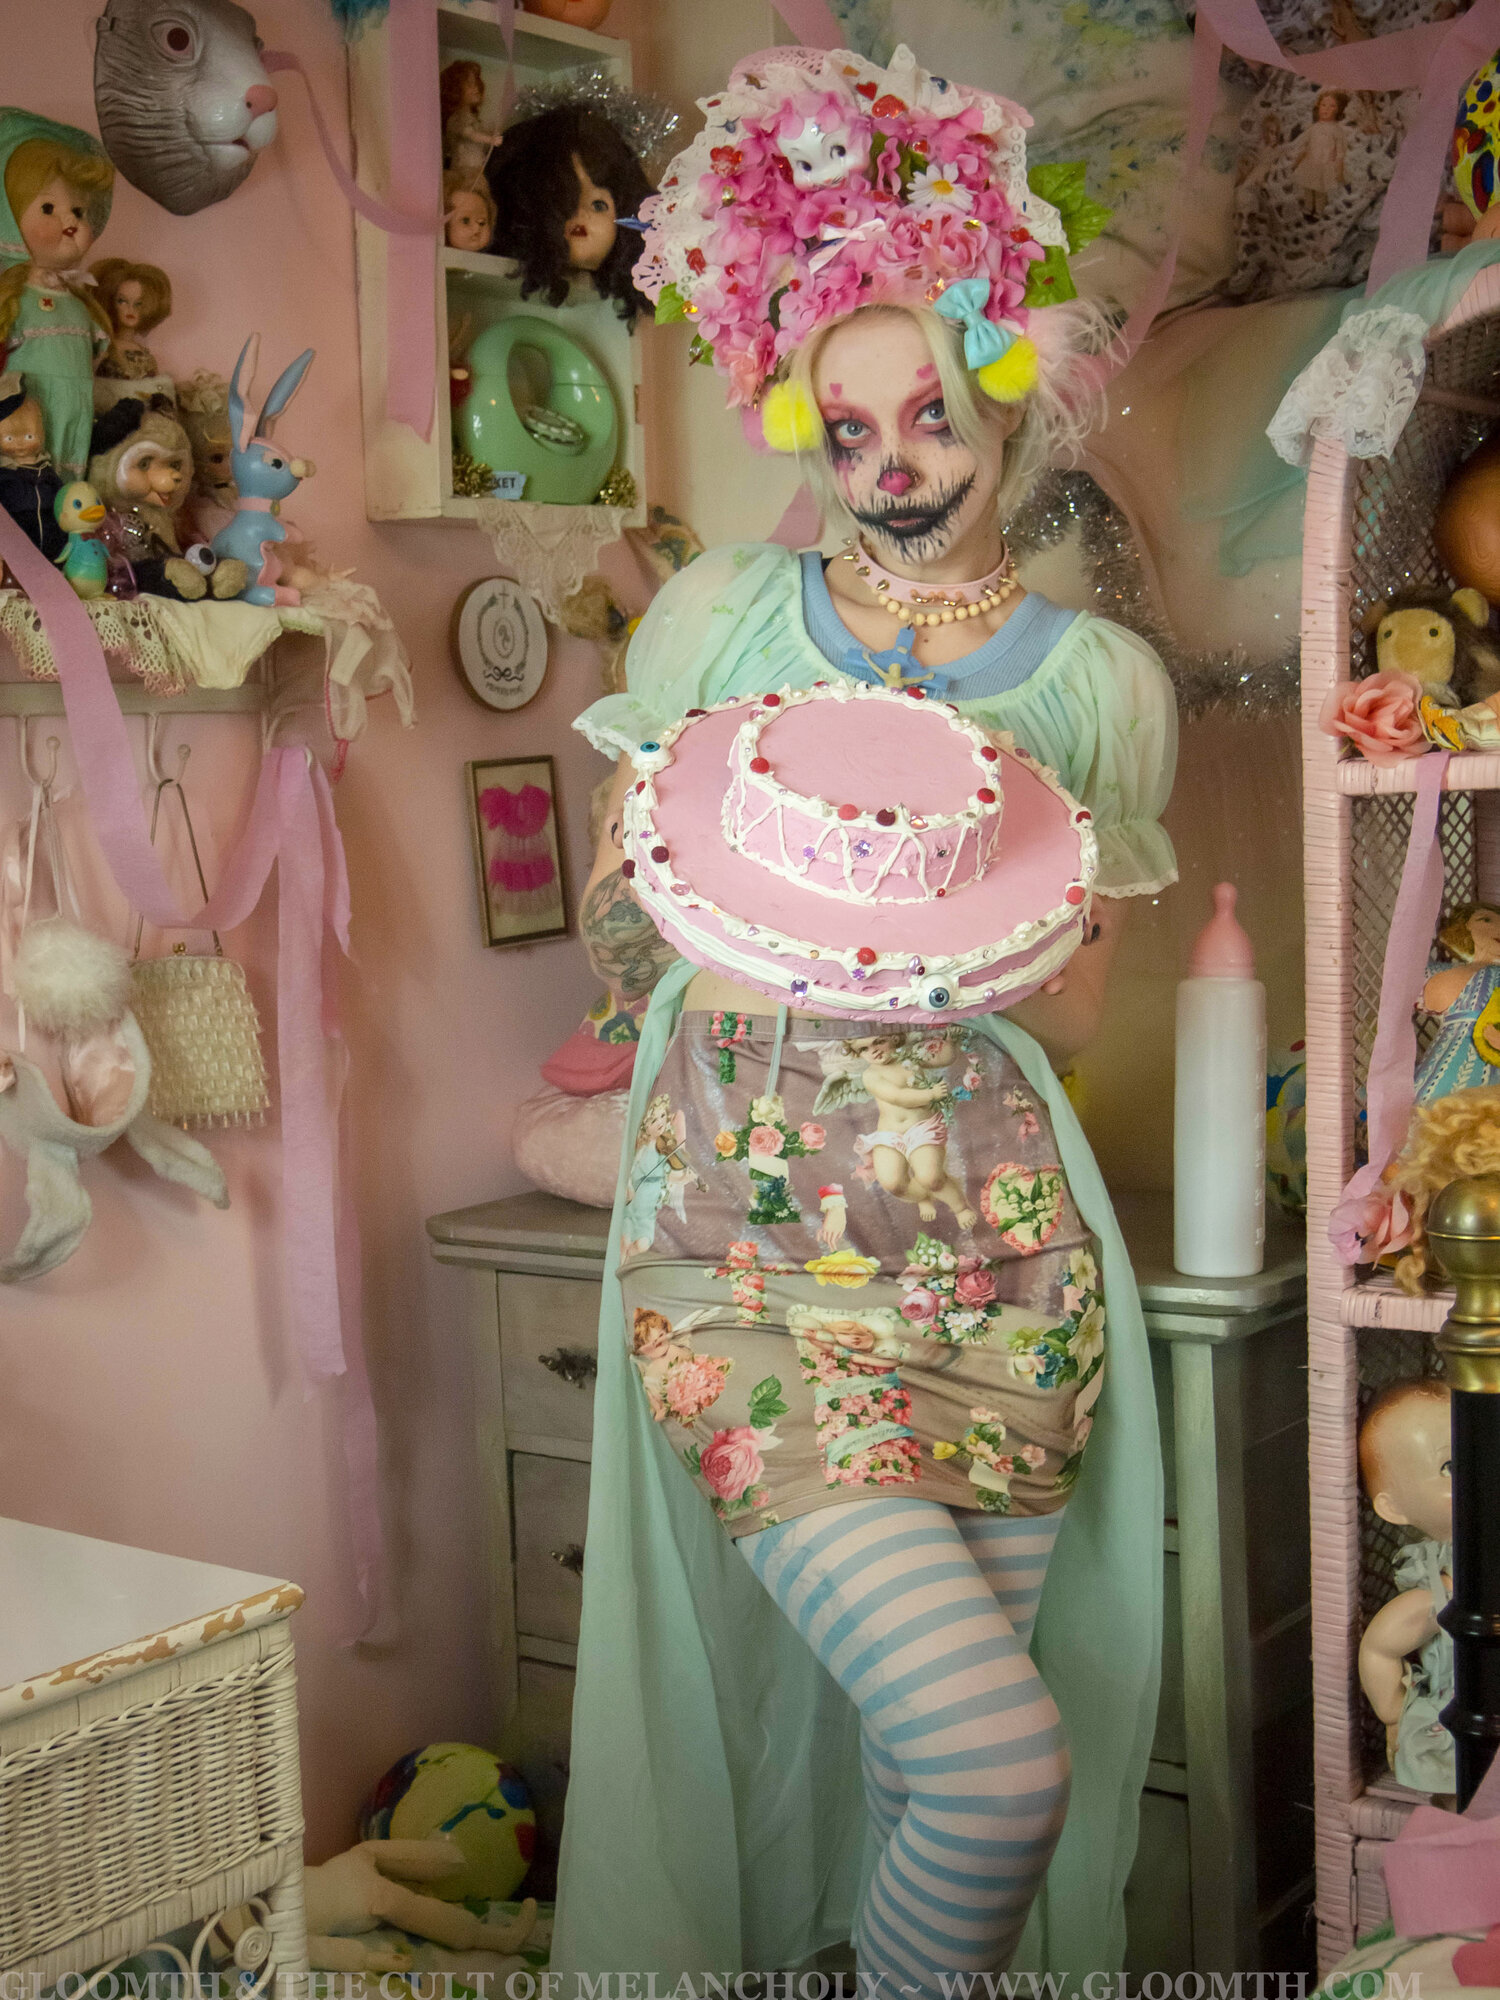 Kawaii Clown Outfit! – Gloomth & the Cult of Melancholy